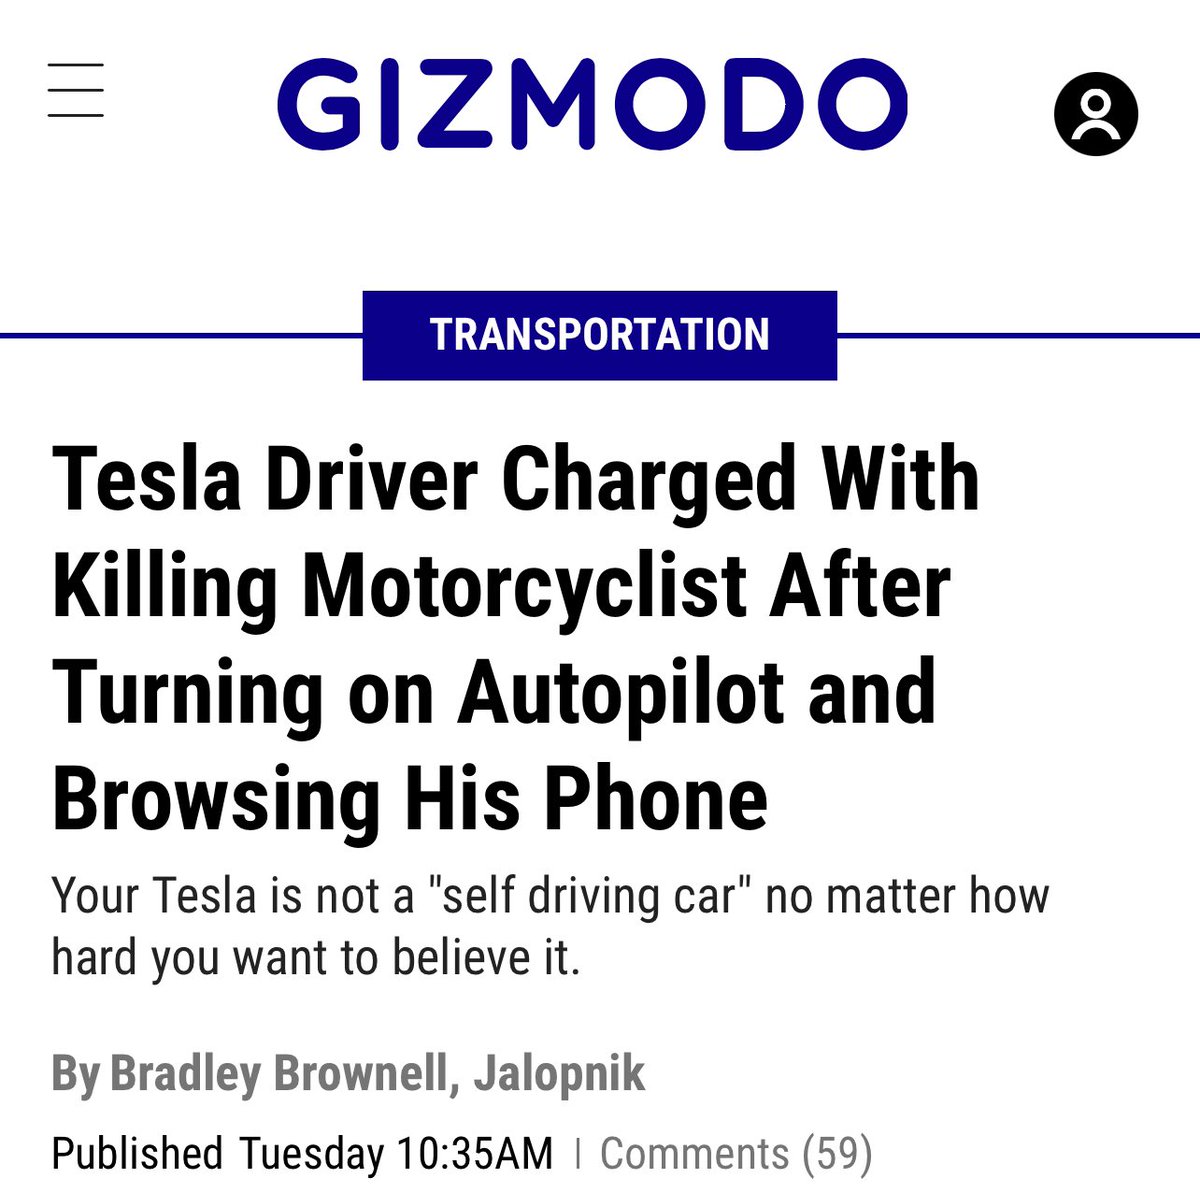 A Tesla owner has been charged with vehicular homicide for killing a motorcyclist while browsing the web on their phone while the car was on Autopilot. According to the driver he was “putting the trust in the machine to drive for him,” The naming of this feature kills people.